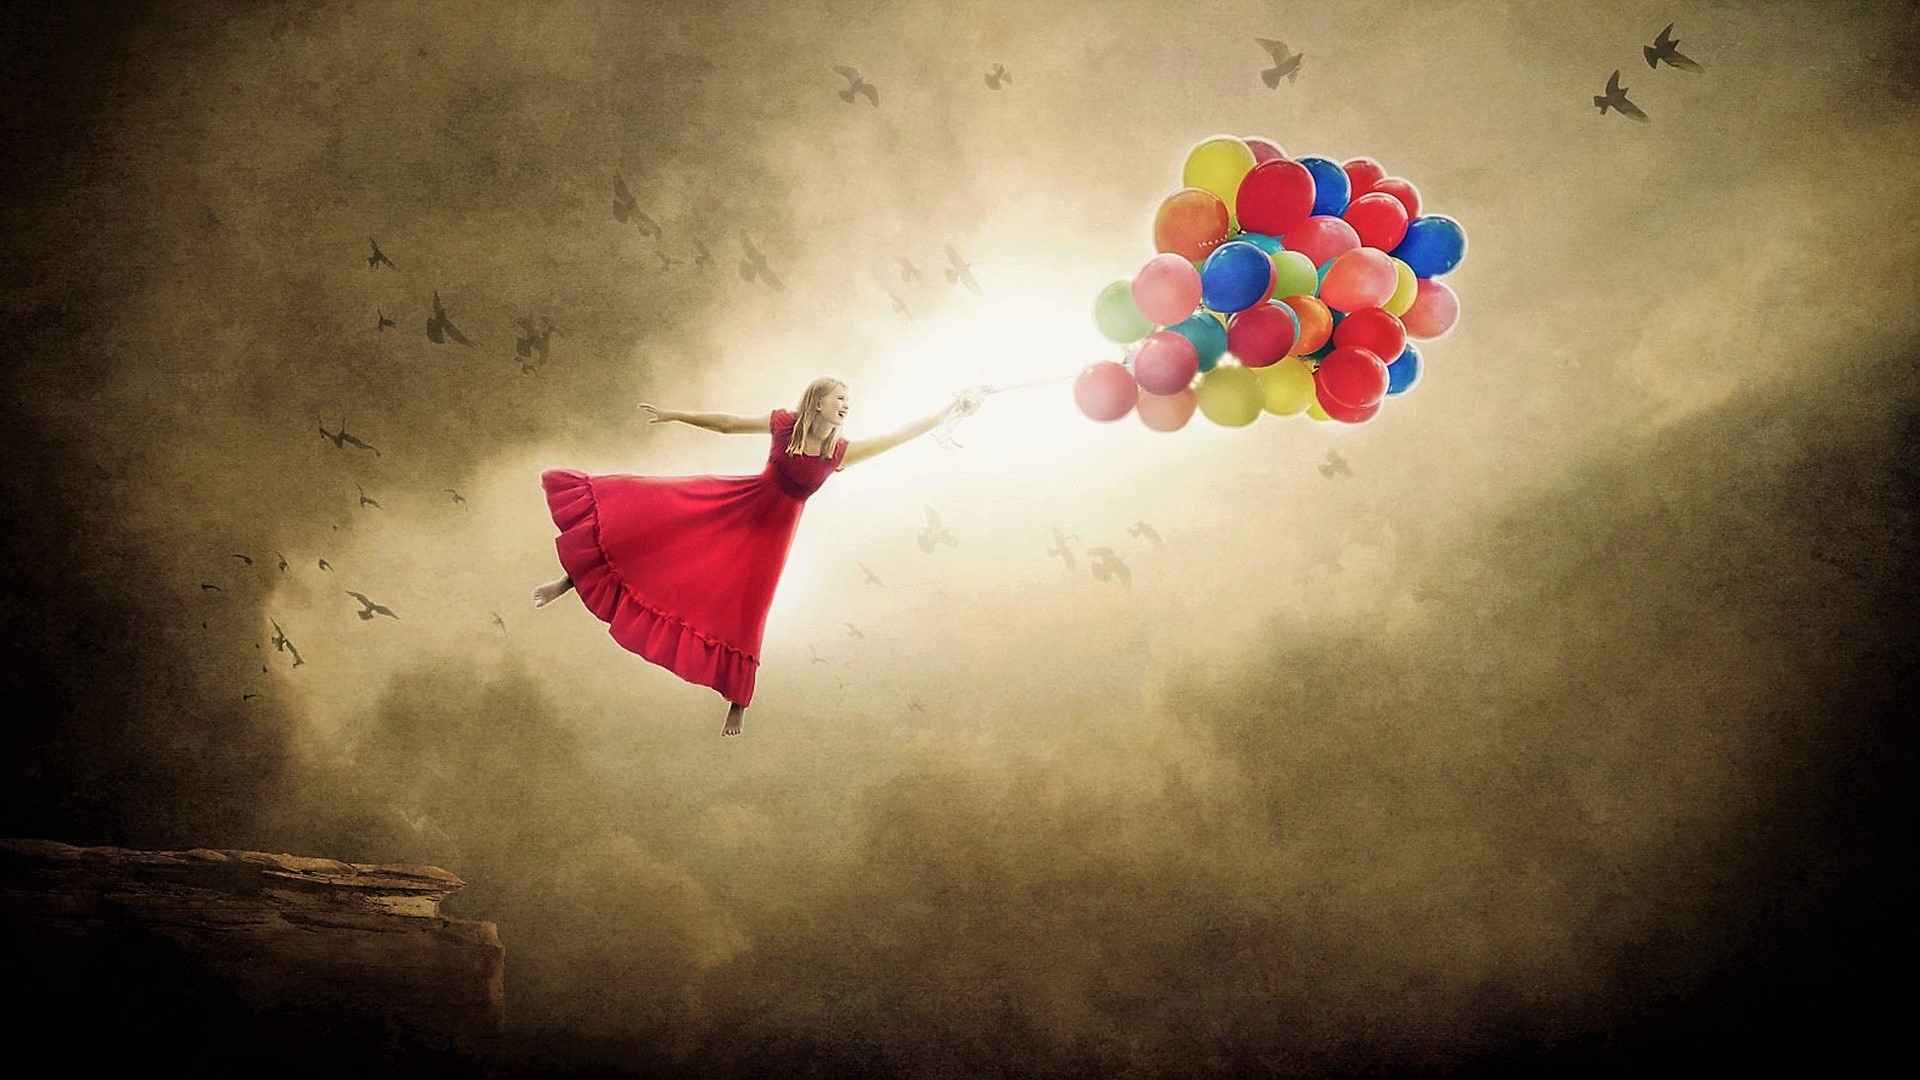 Girl with Balloons - Image Abyss